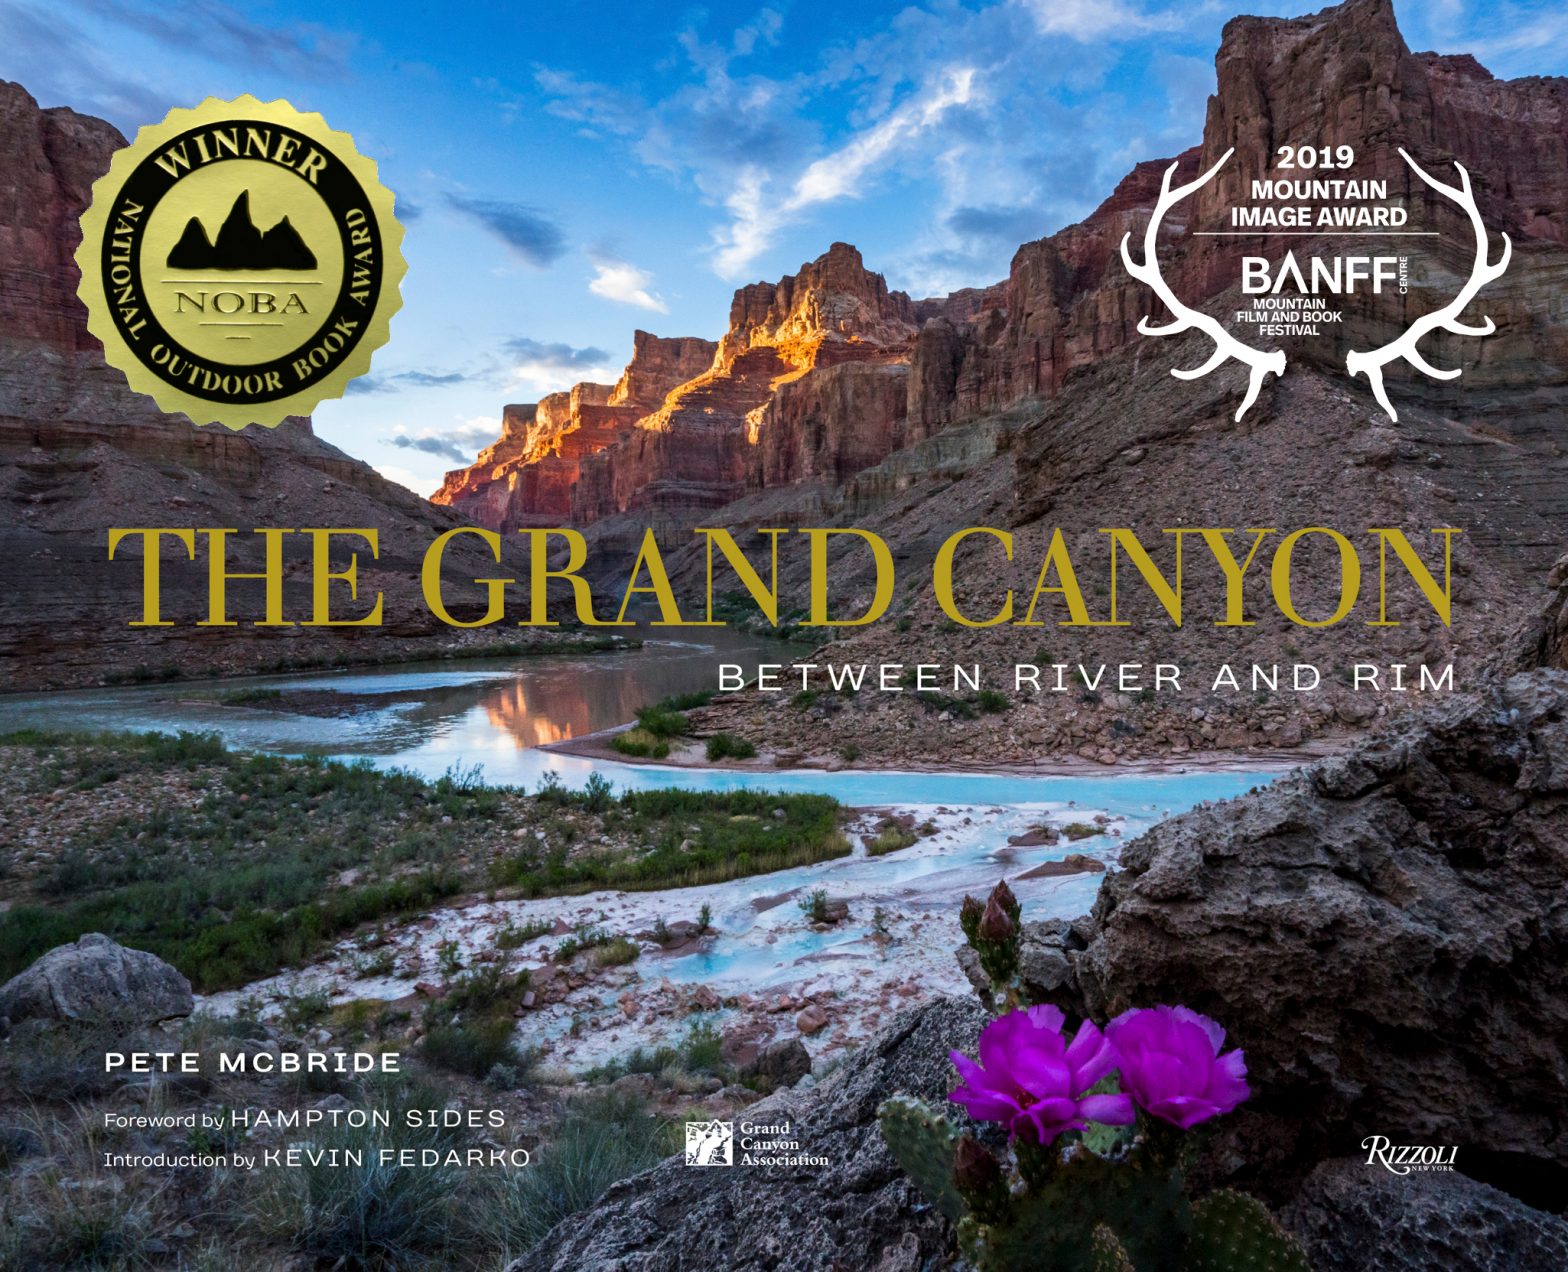 The cover of The Grand Canyon: Between River and Rim book